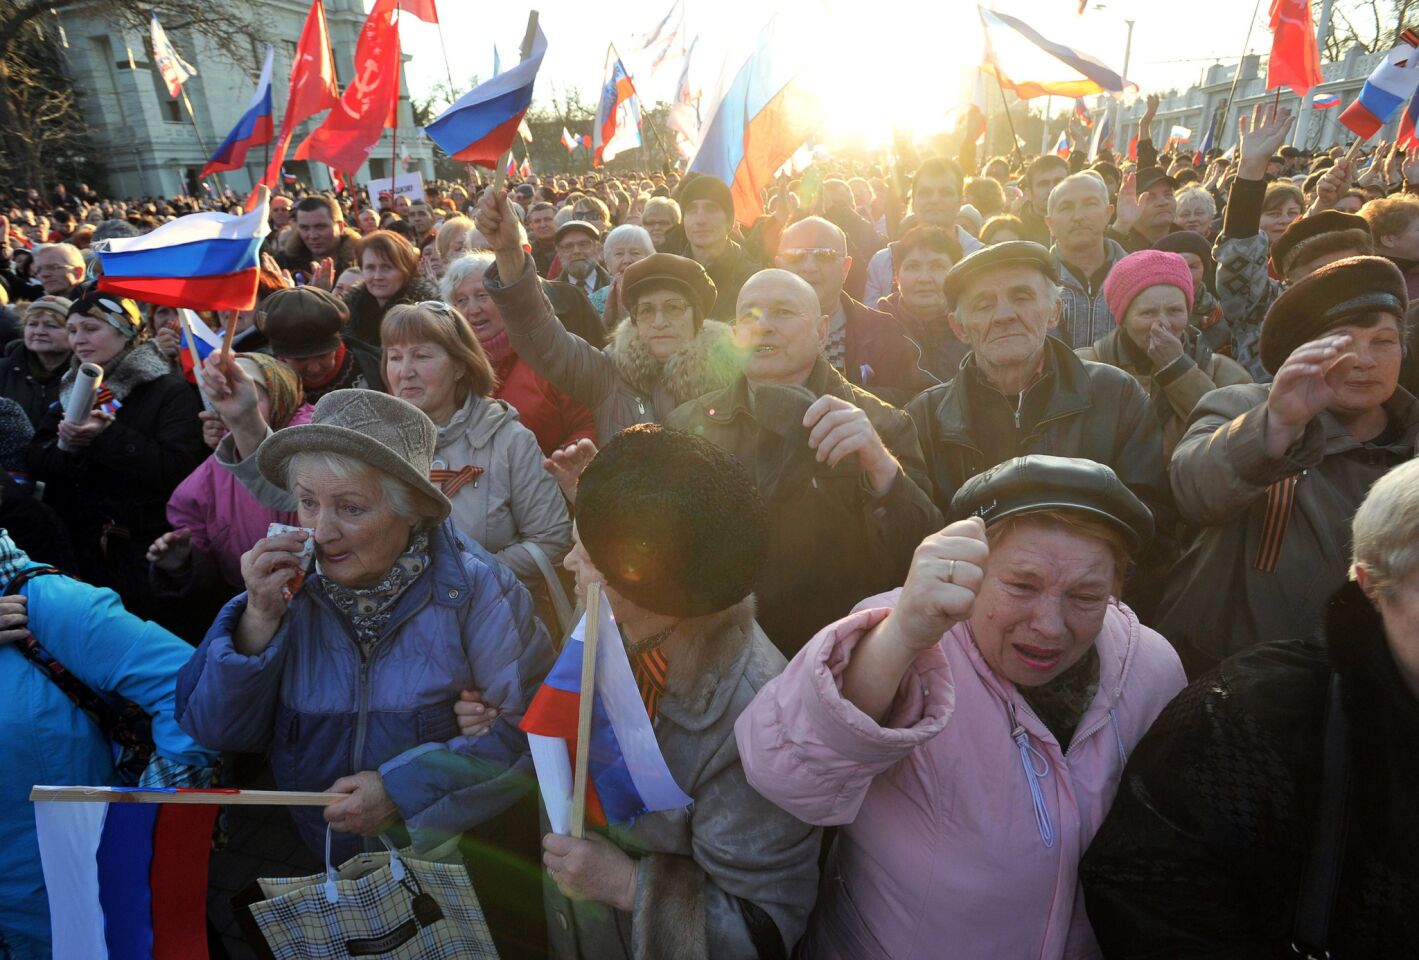 Pro-Russian activists holding Russian flags take part in a rally in the western Crimean city of Yevpatoria, Ukraine.